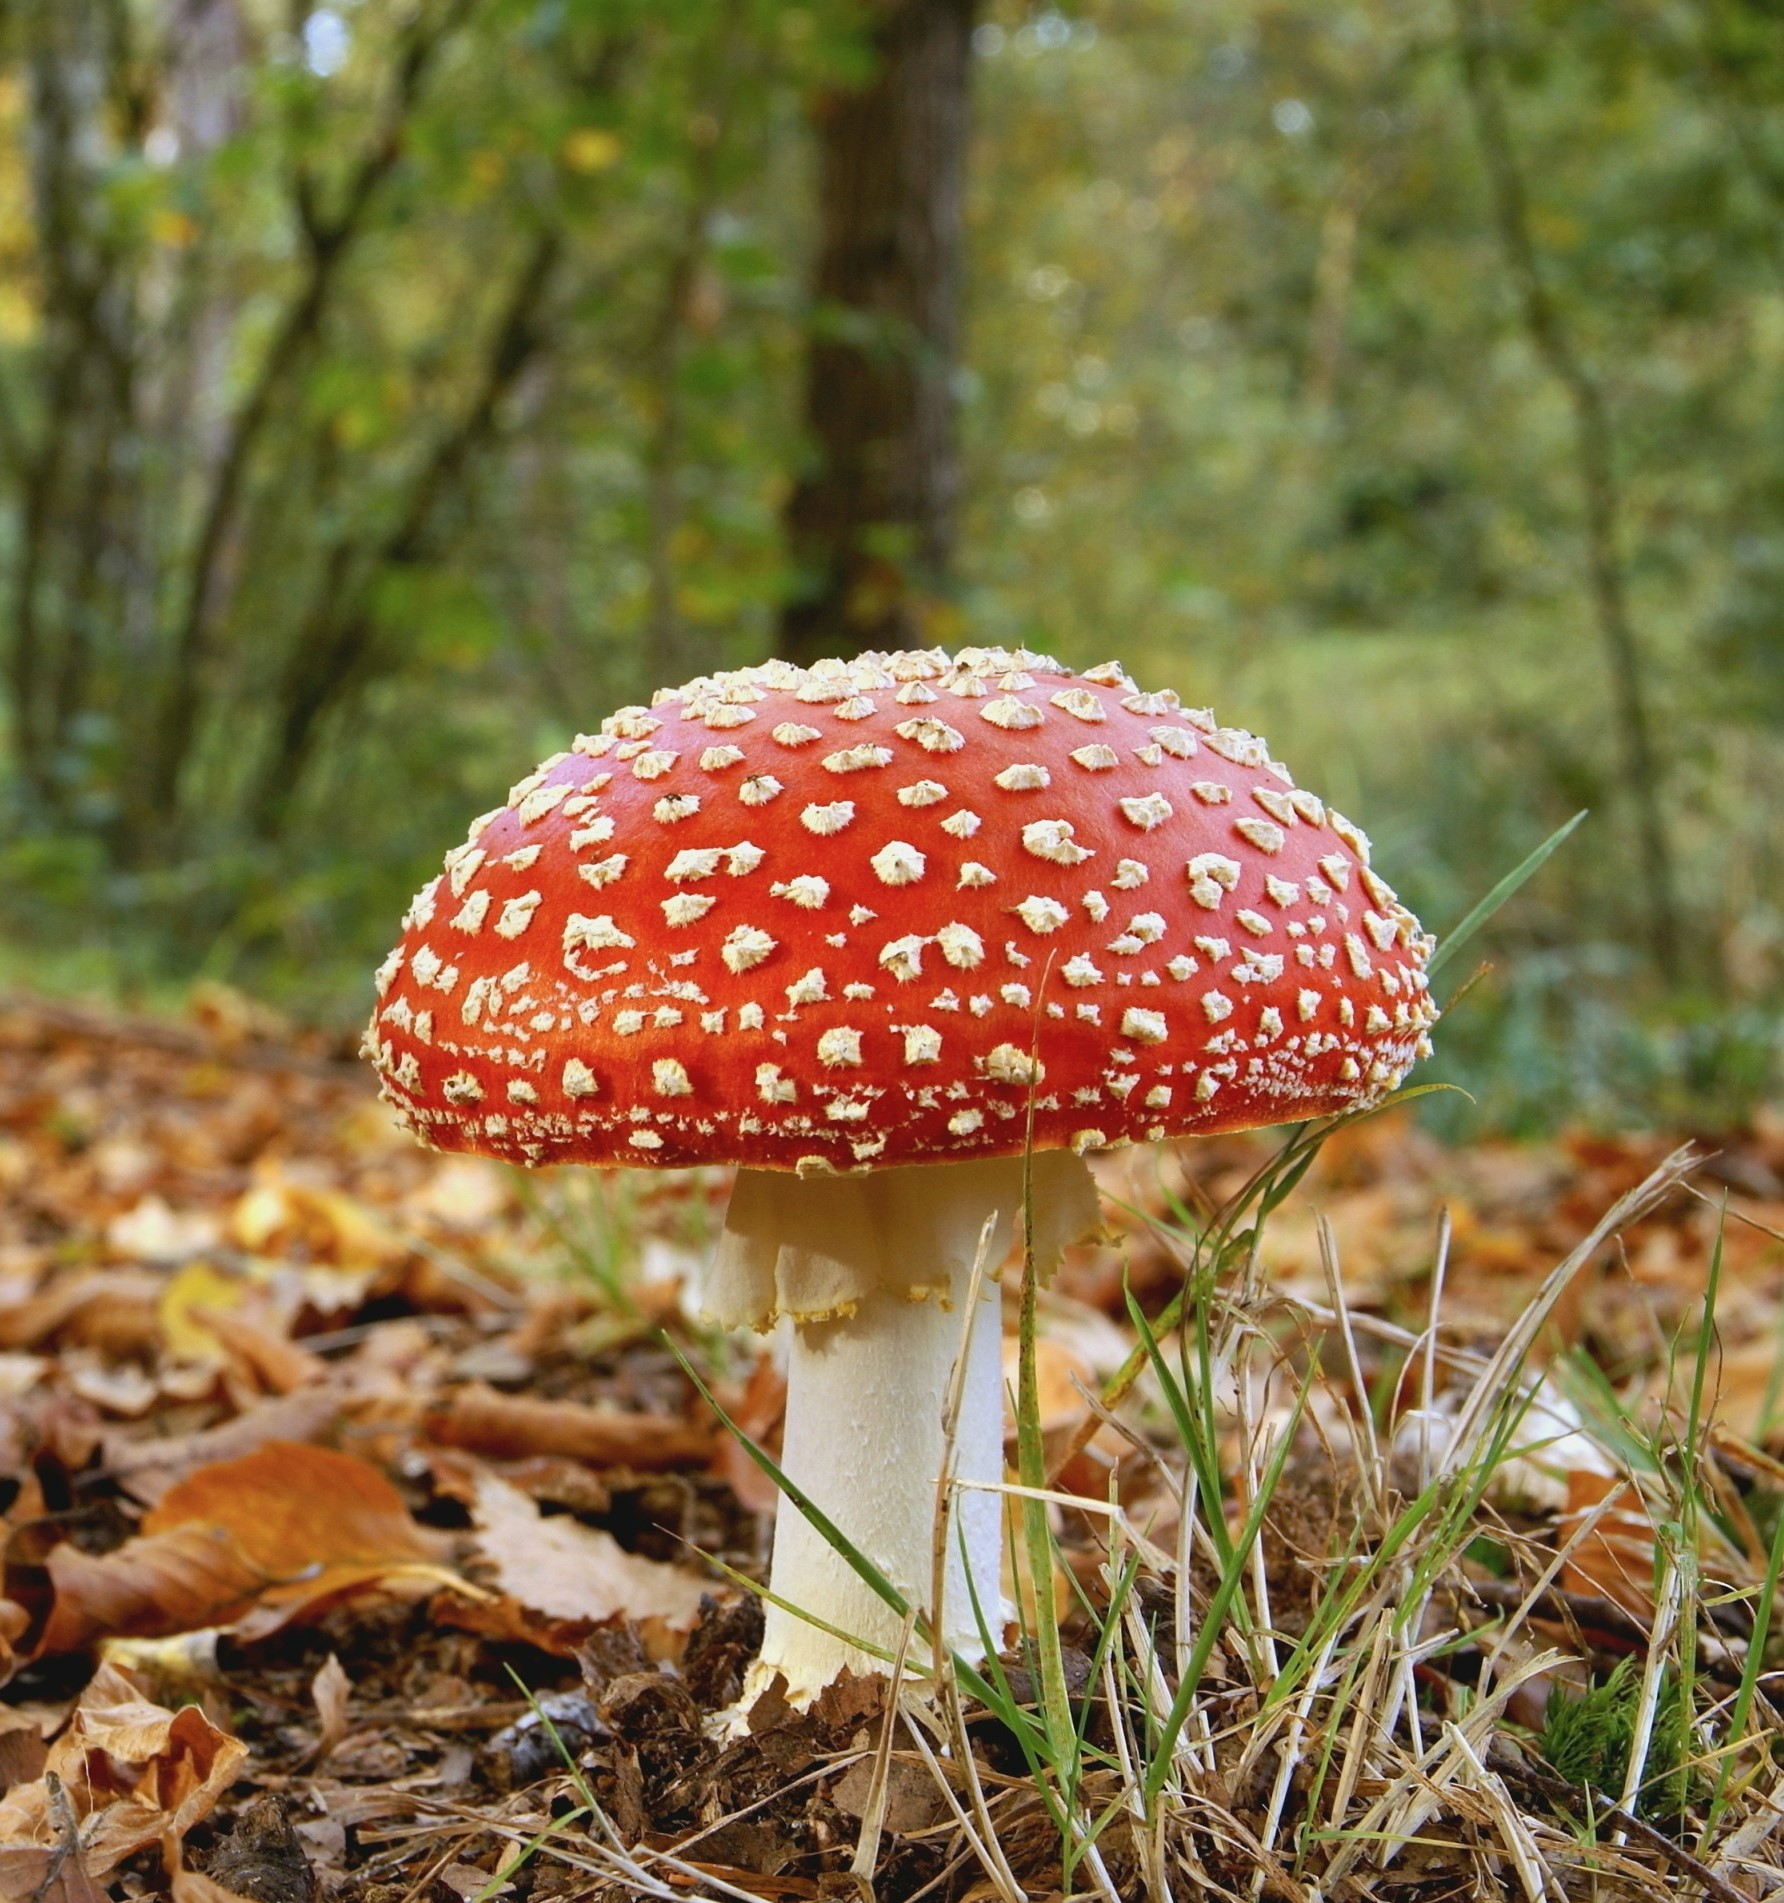 Fly agaric amongst autumn leaves on the Forest floor